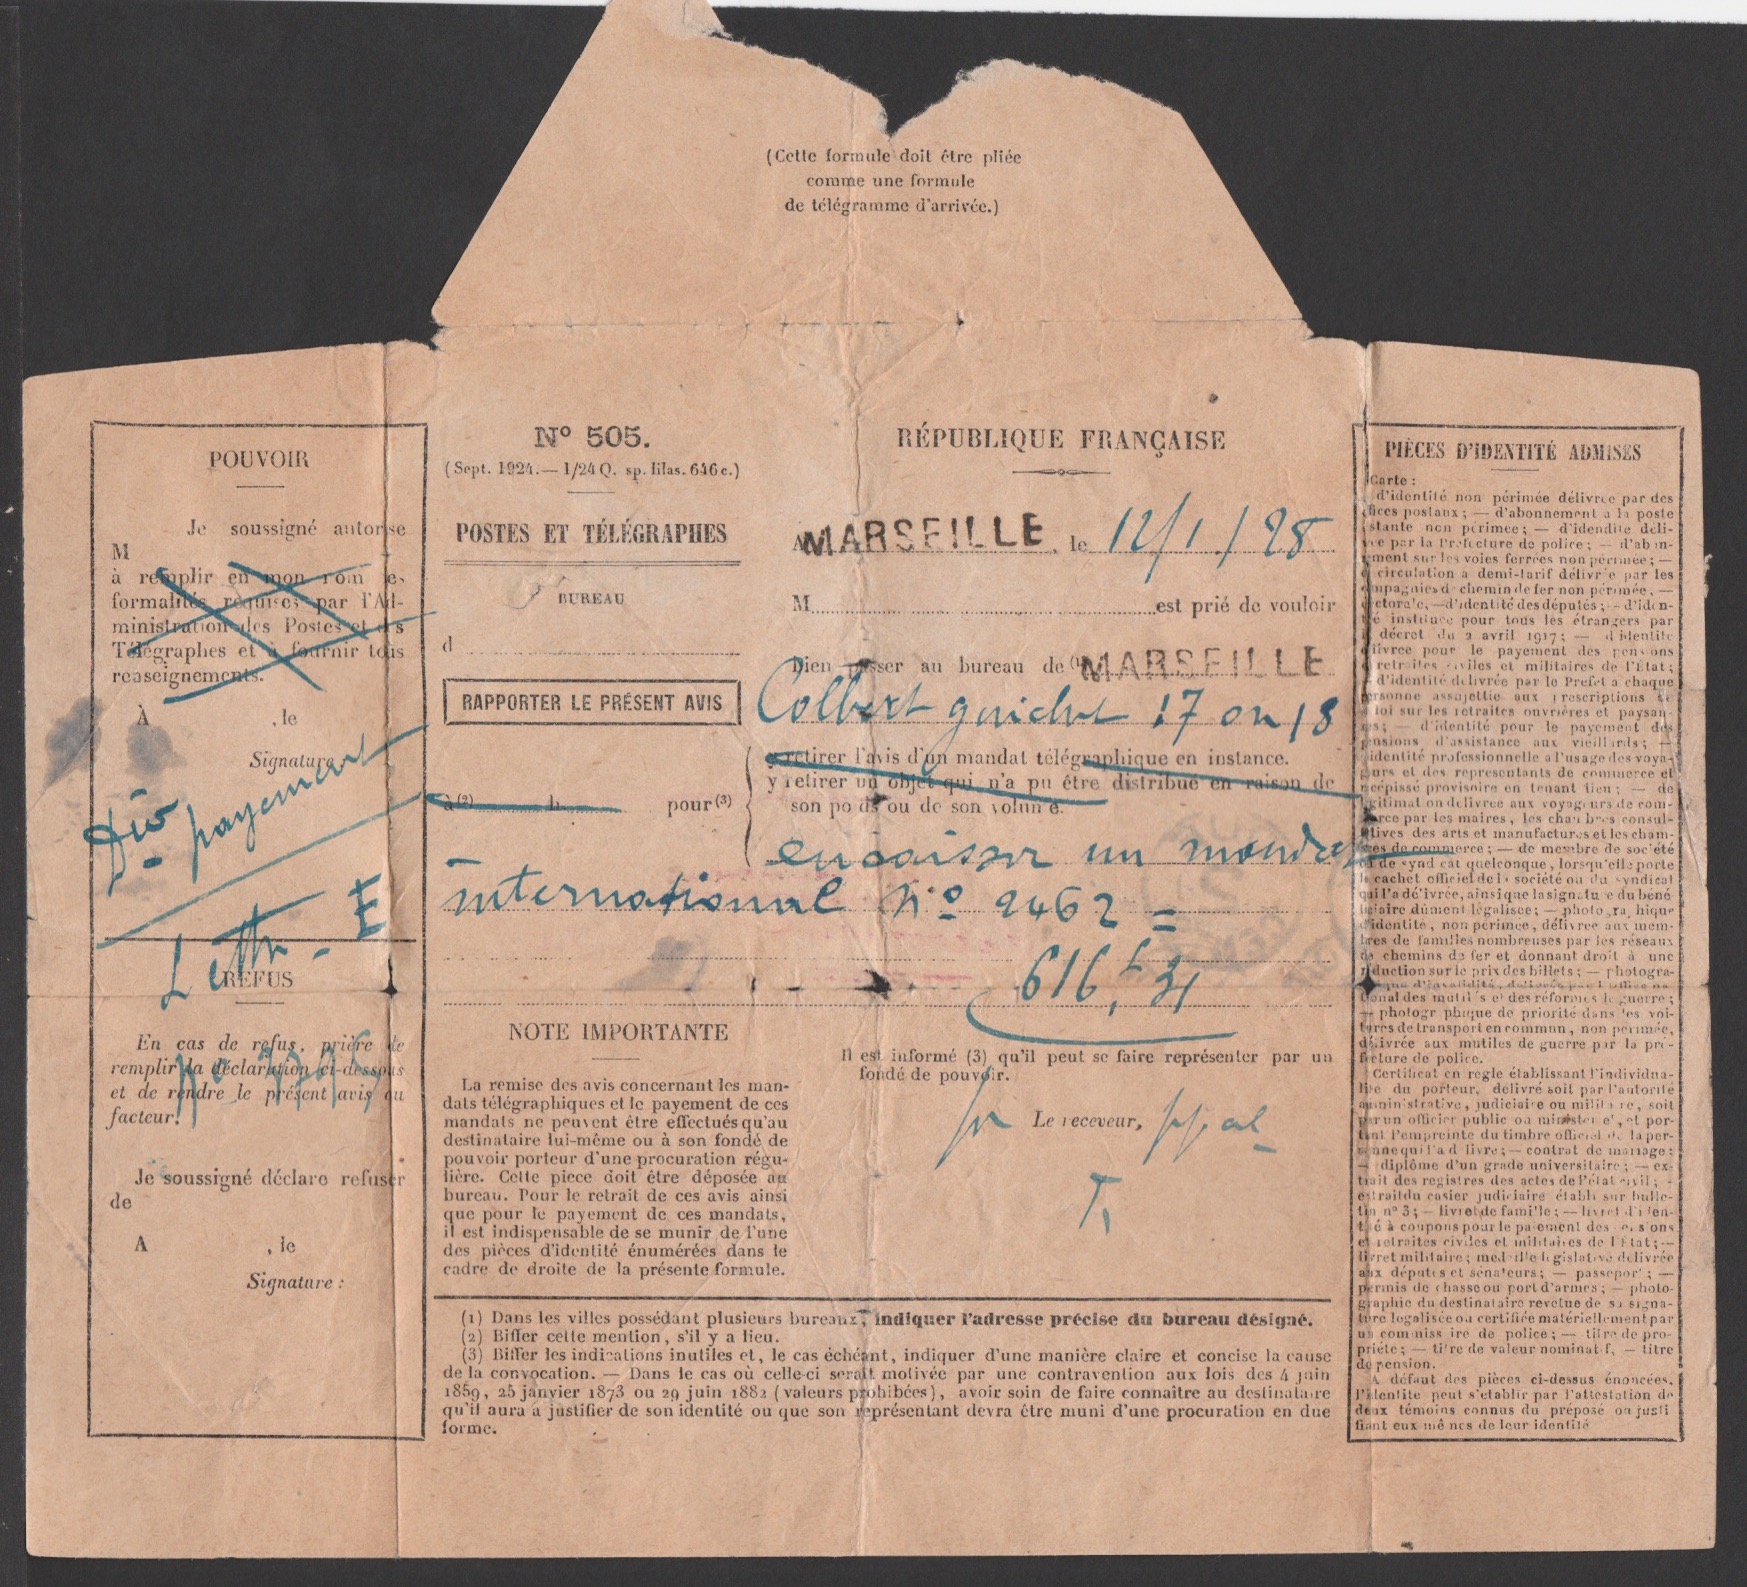 GIBRALTAR 1928 (Jan 12) France Official Postal Note (some wear) from the Marseille Post Office to... - Image 3 of 3